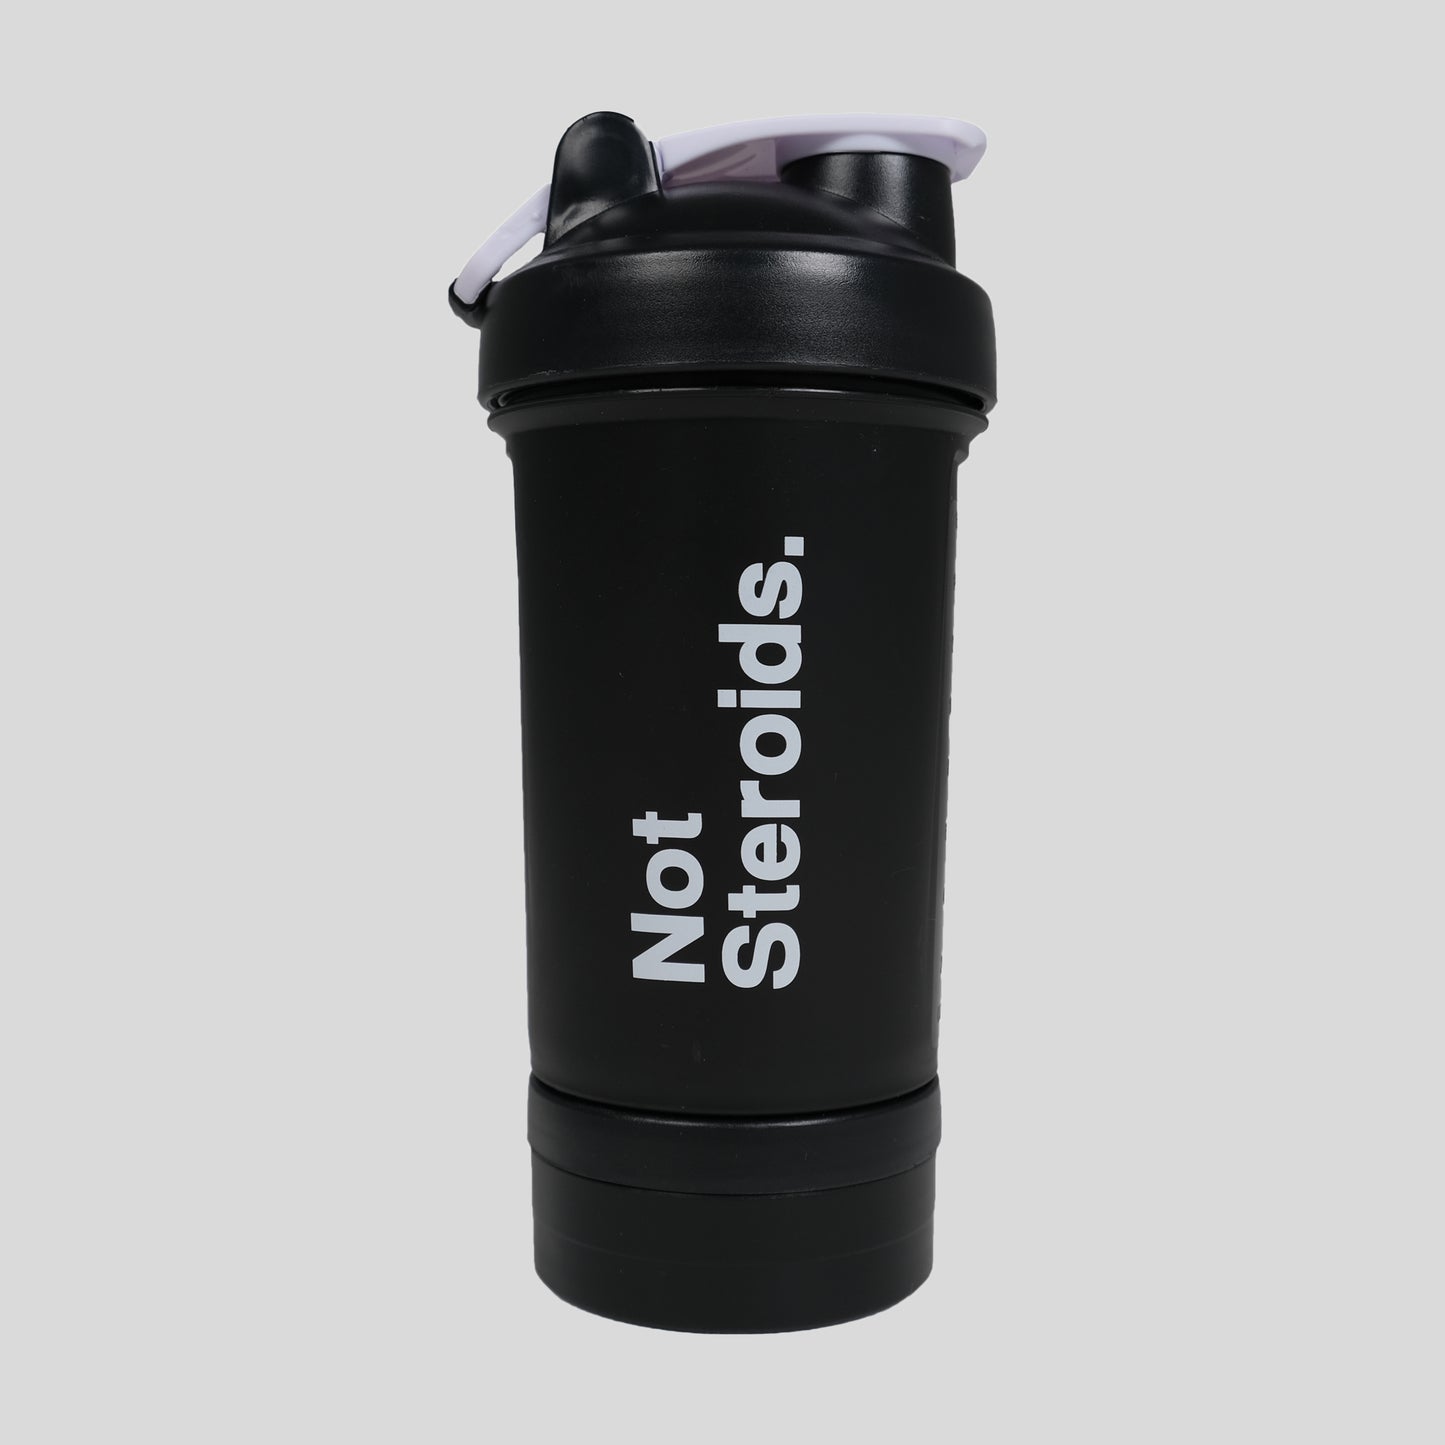 "Not Steroids" Shaker